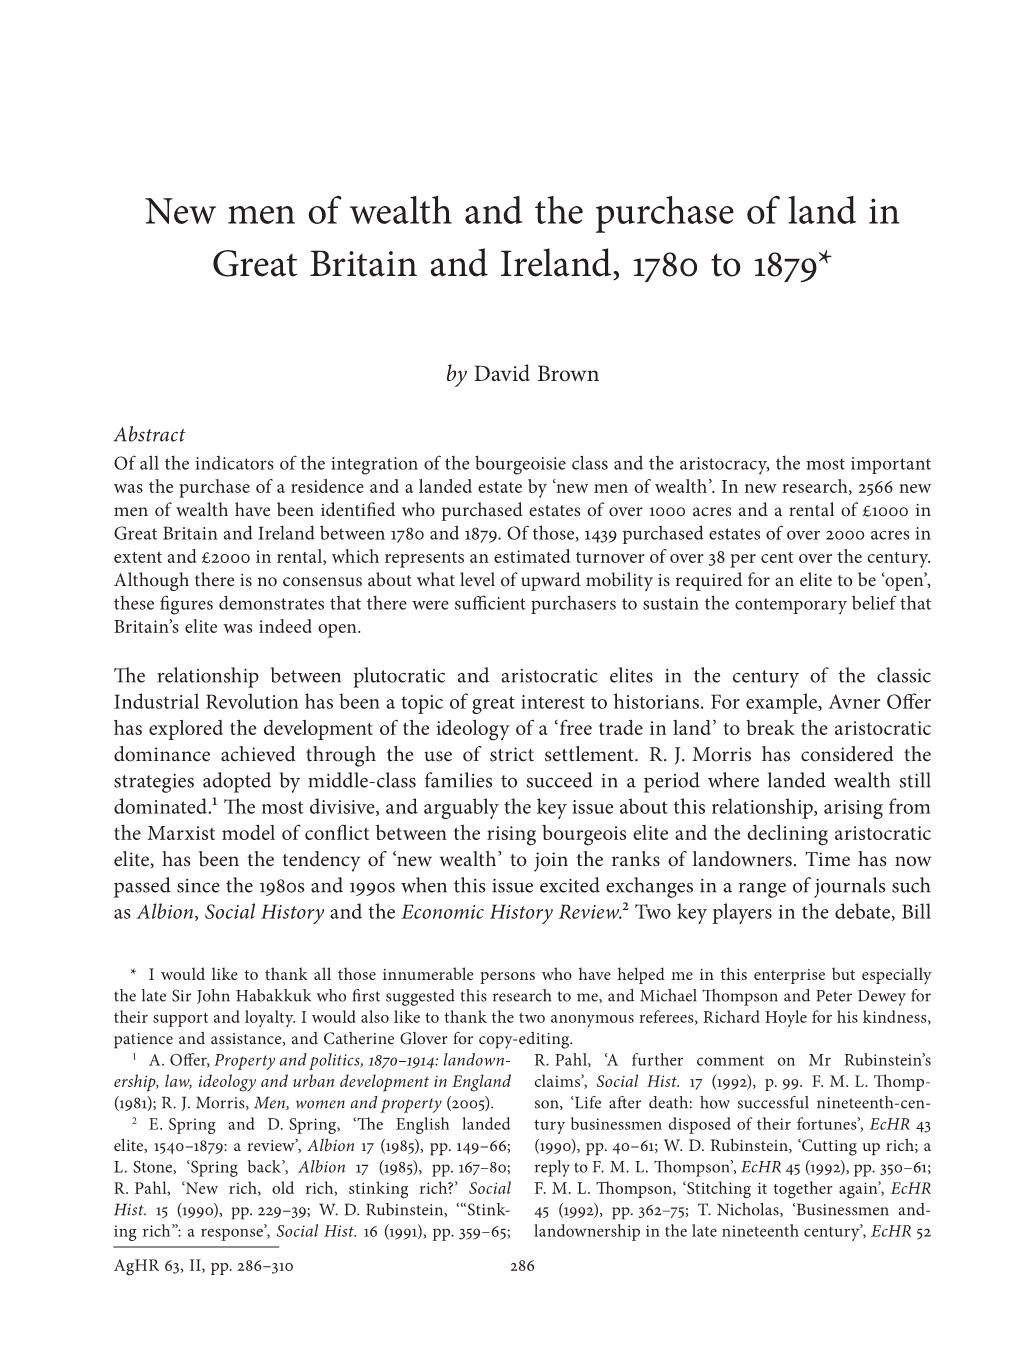 New Men of Wealth and the Purchase of Land in Great Britain and Ireland, 1780 to 1879*